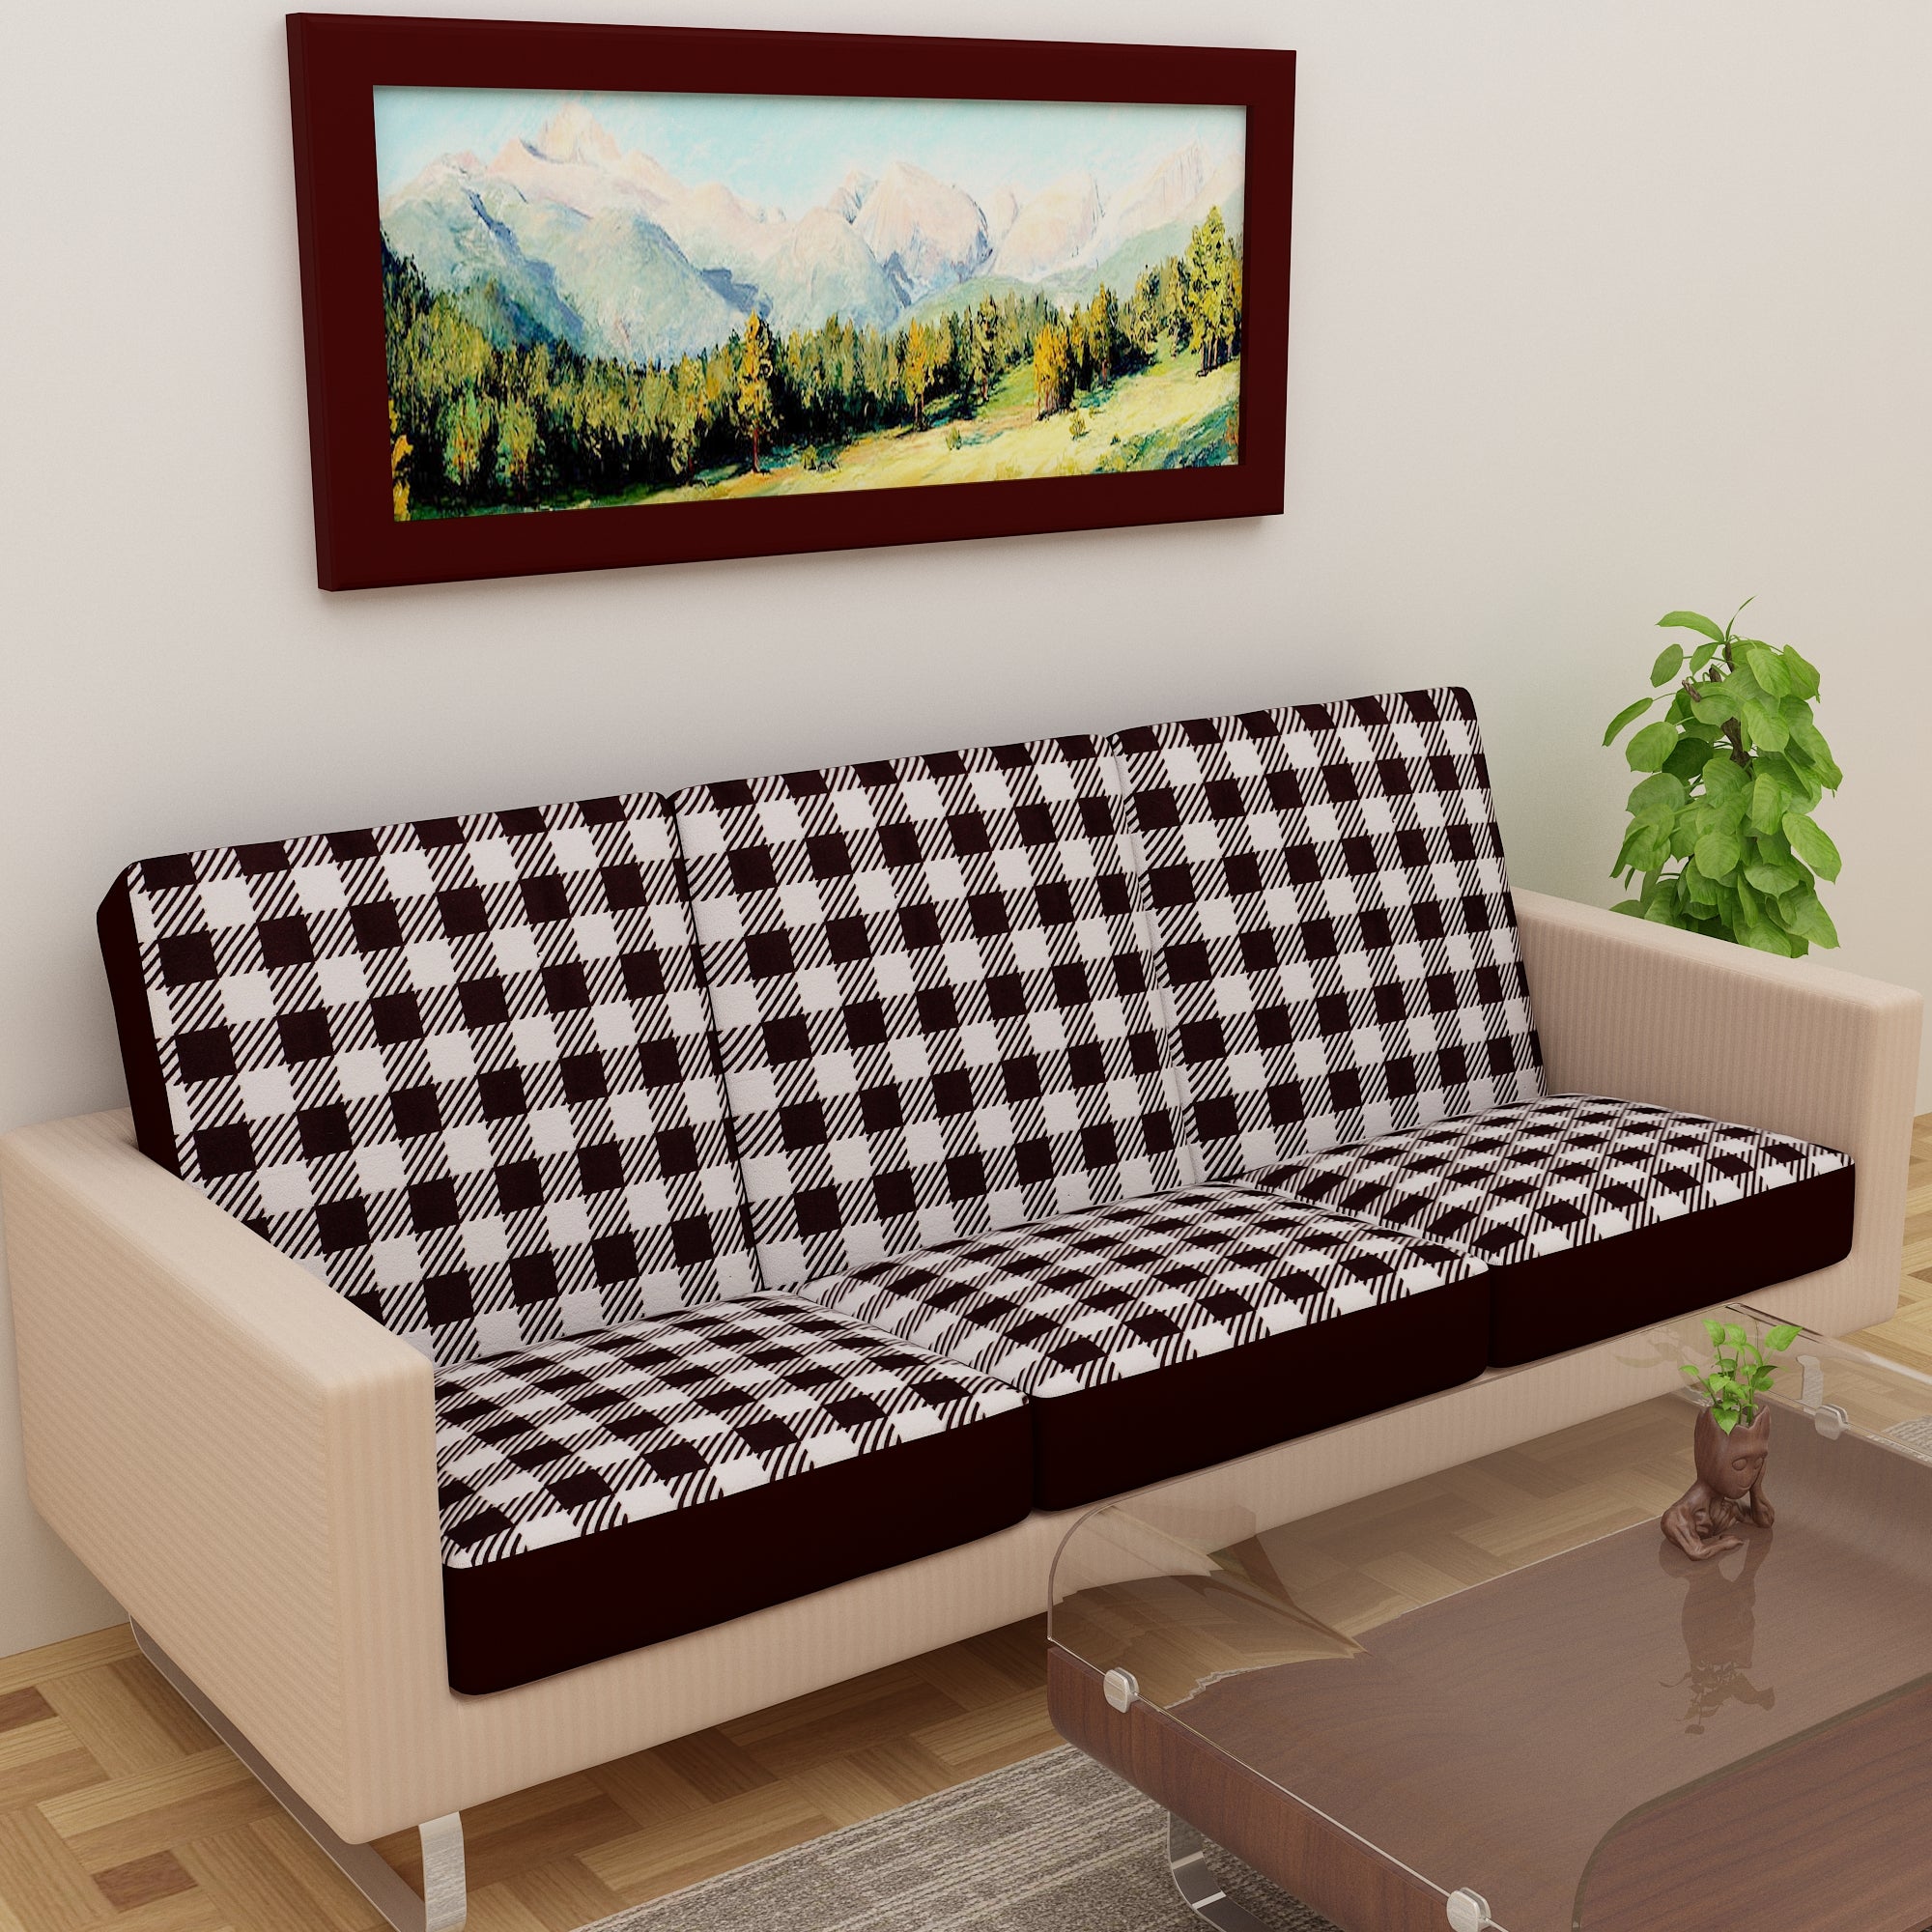 Waterproof Printed Sofa Seat Protector Cover with Stretchable Elastic, White Brown - Dream Care Furnishings Private Limited